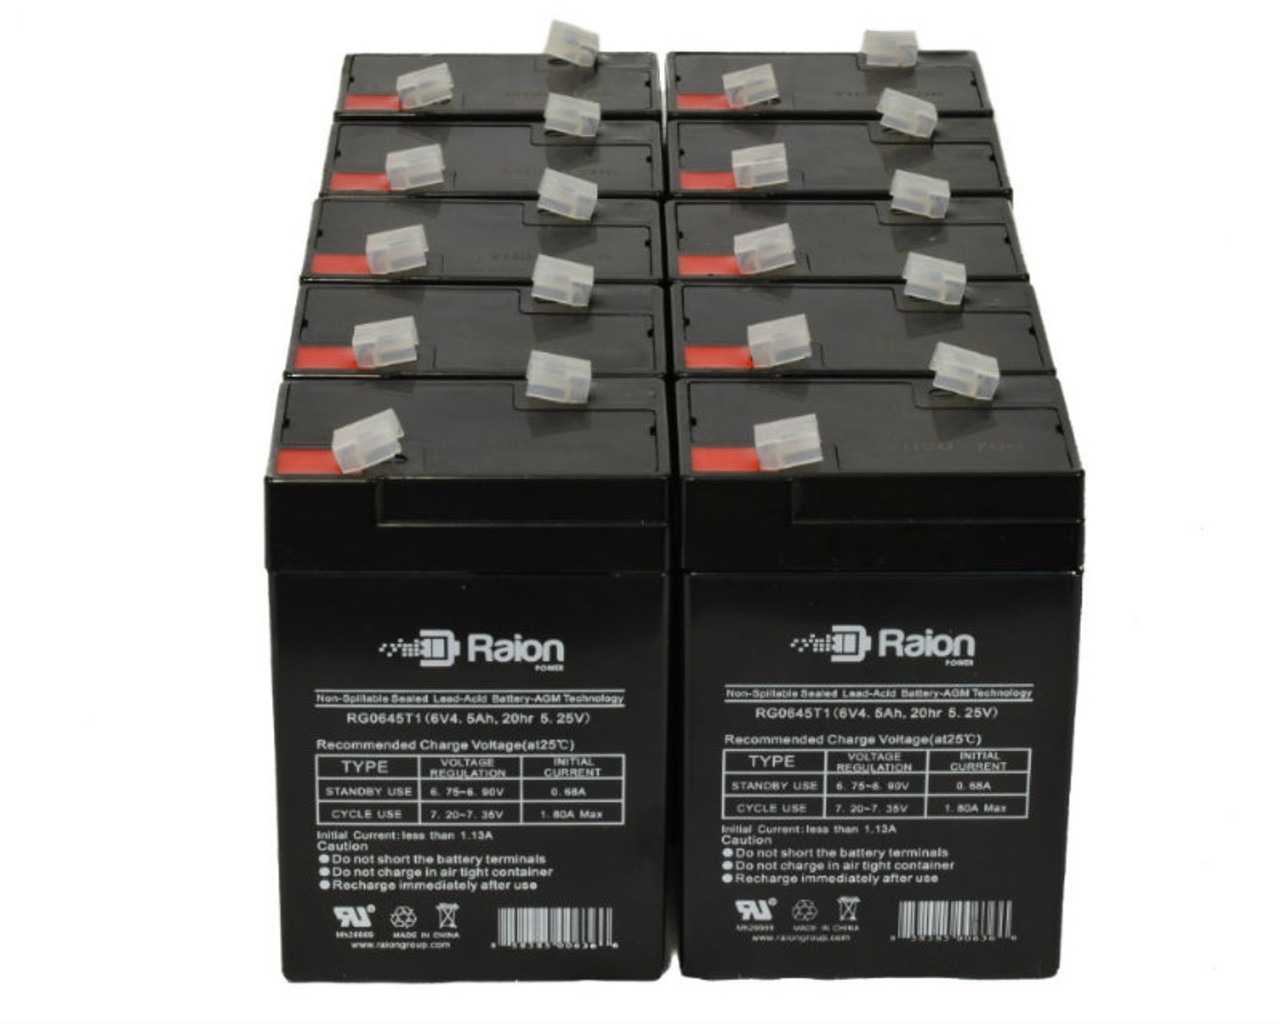 Raion Power 6 Volt 4.5Ah RG0645T1 Replacement Battery for Tianchang TC6-4.5 - 10 Pack